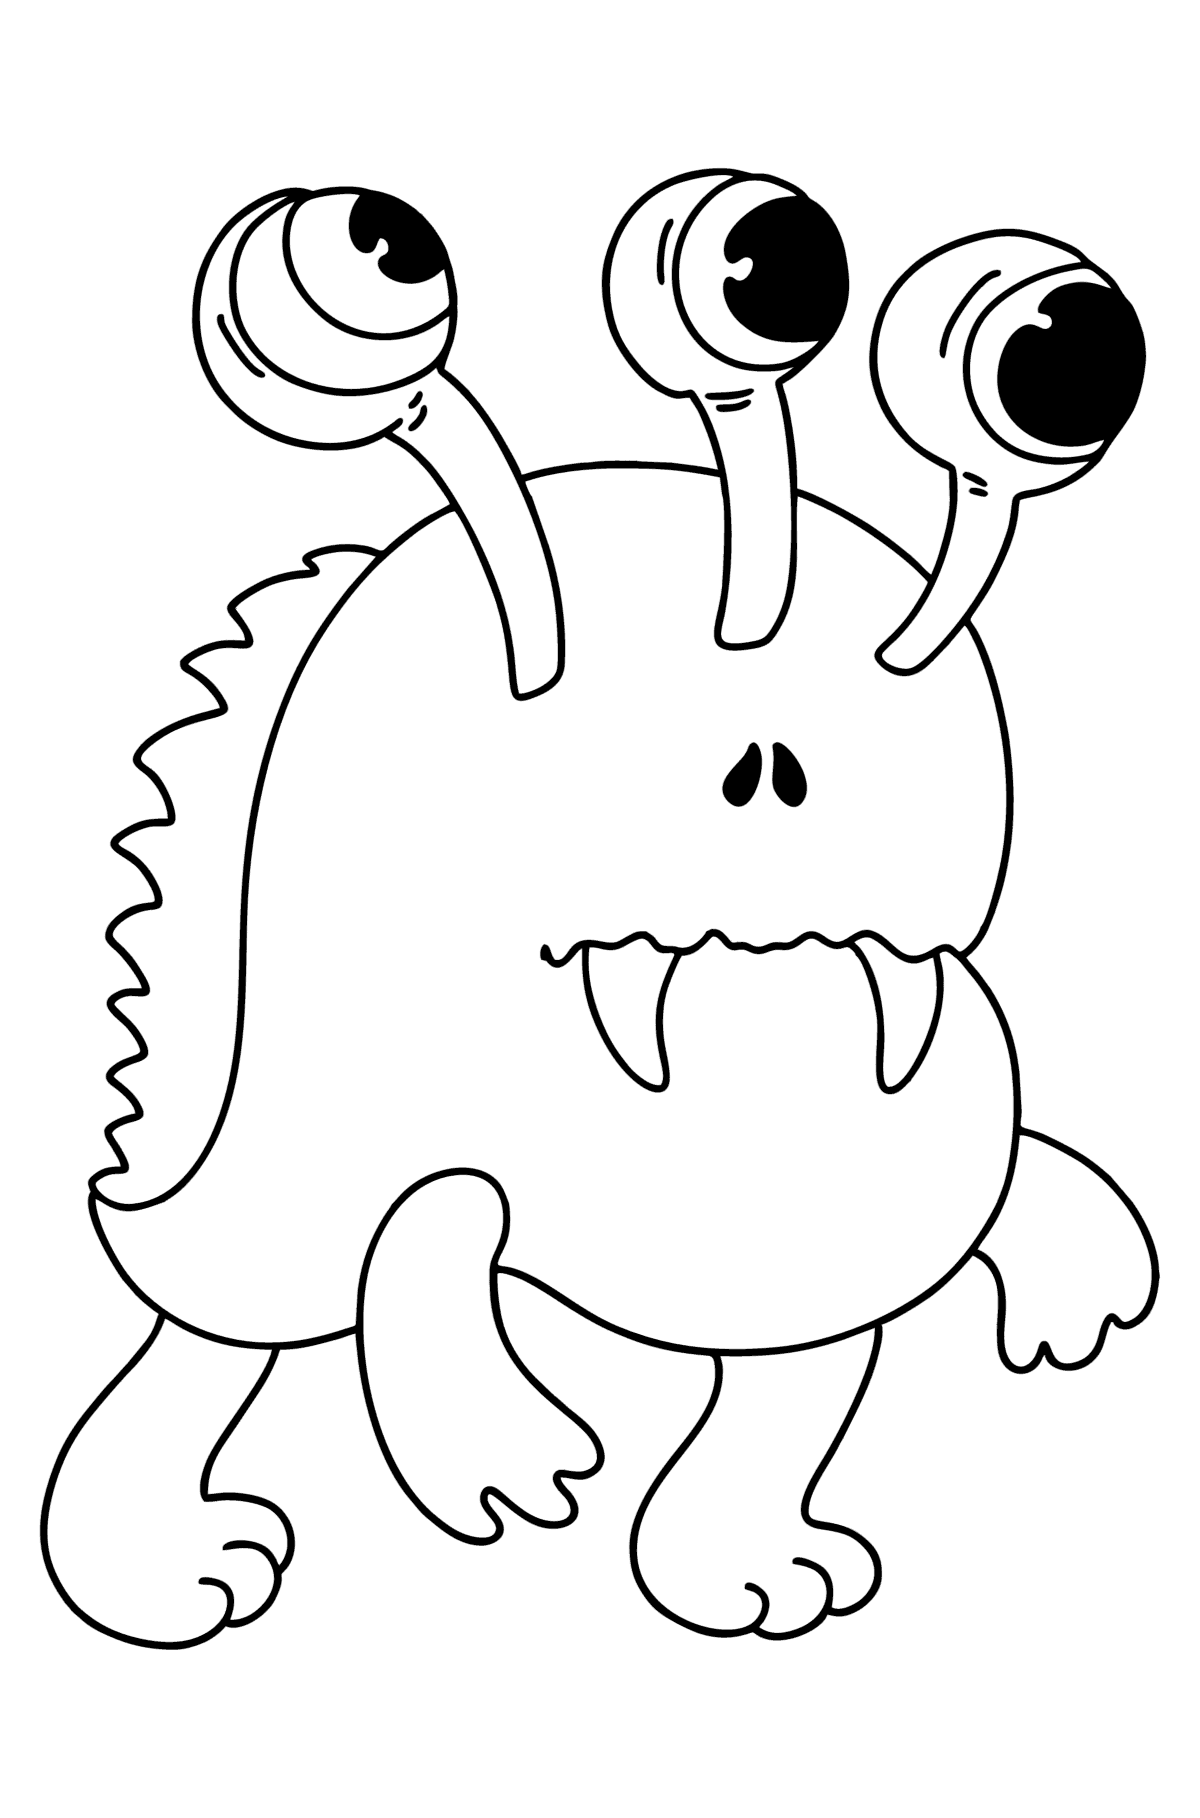 Cute alien coloring pages - Coloring Pages for Kids